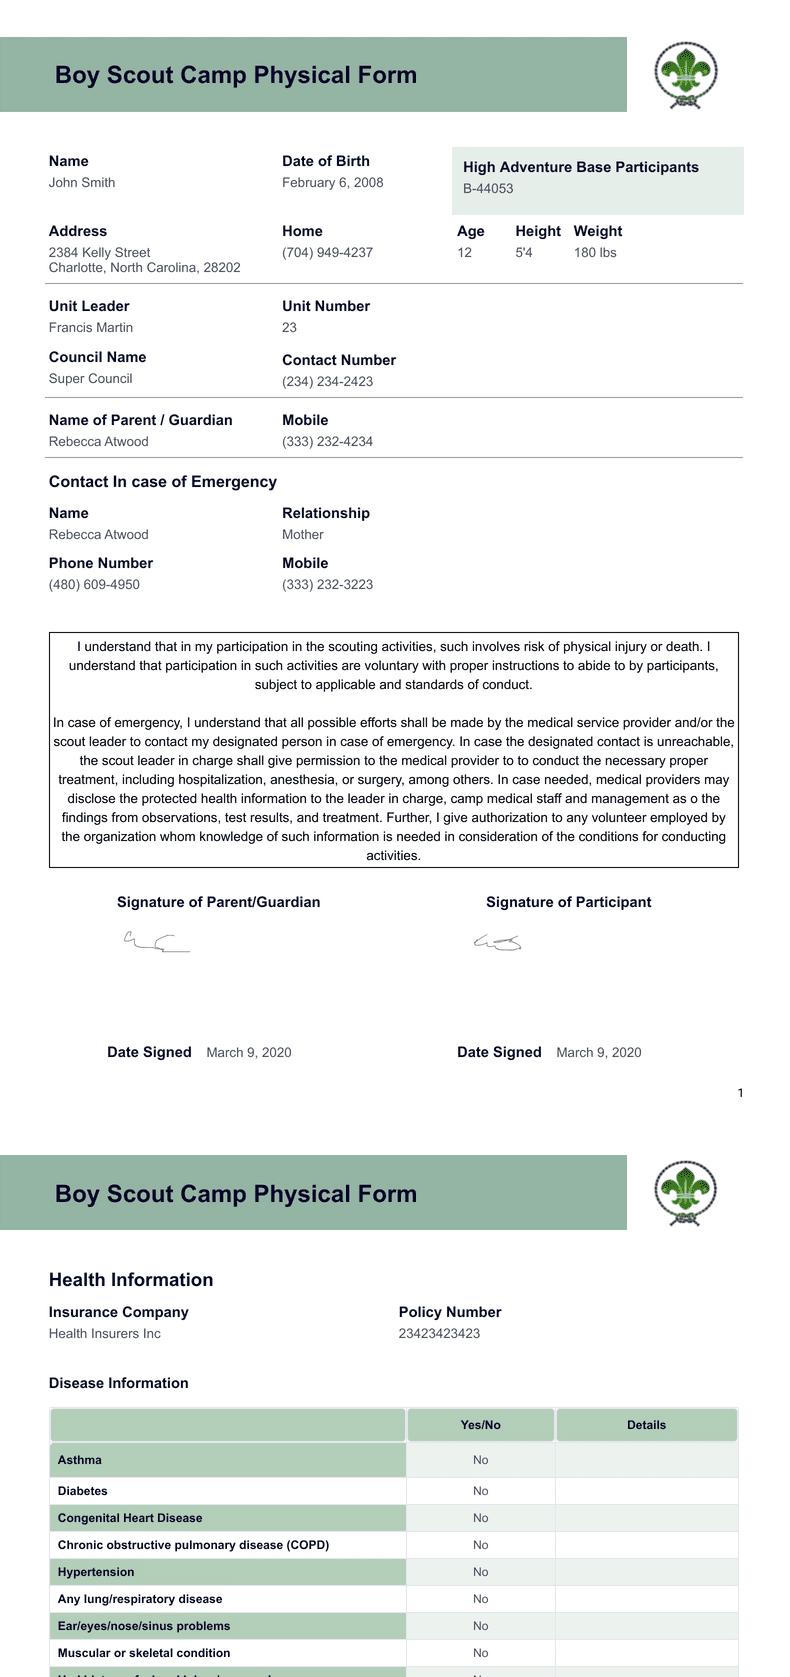 PDF Templates: Boy Scout Camp Physical Form